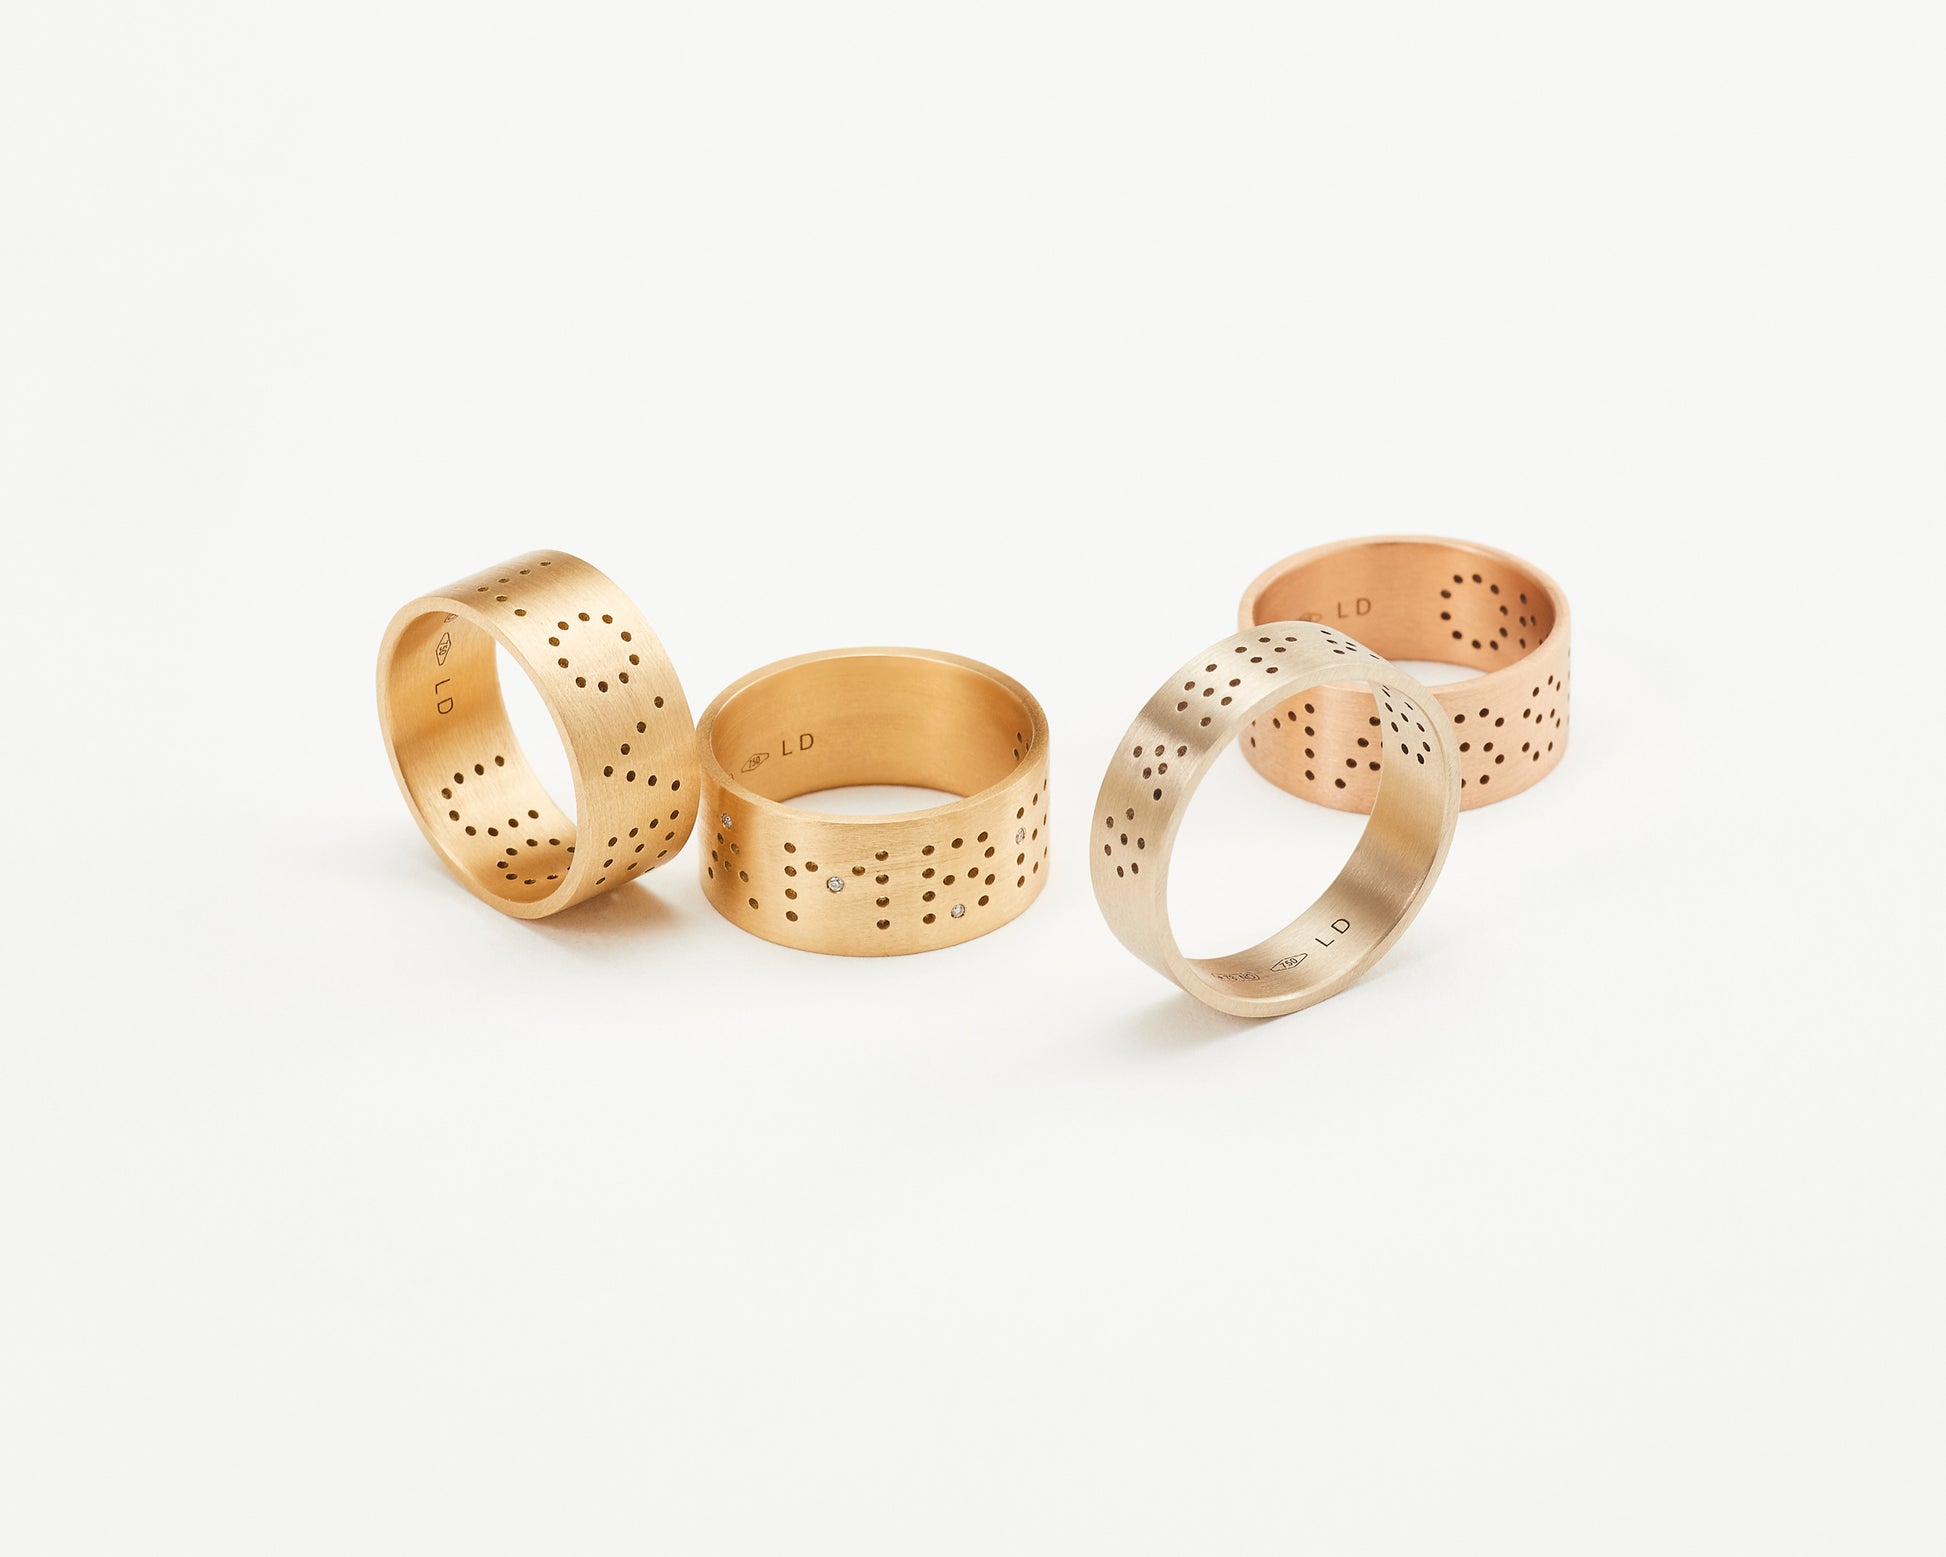 18KT yellow and rose gold band ring - Lettering 